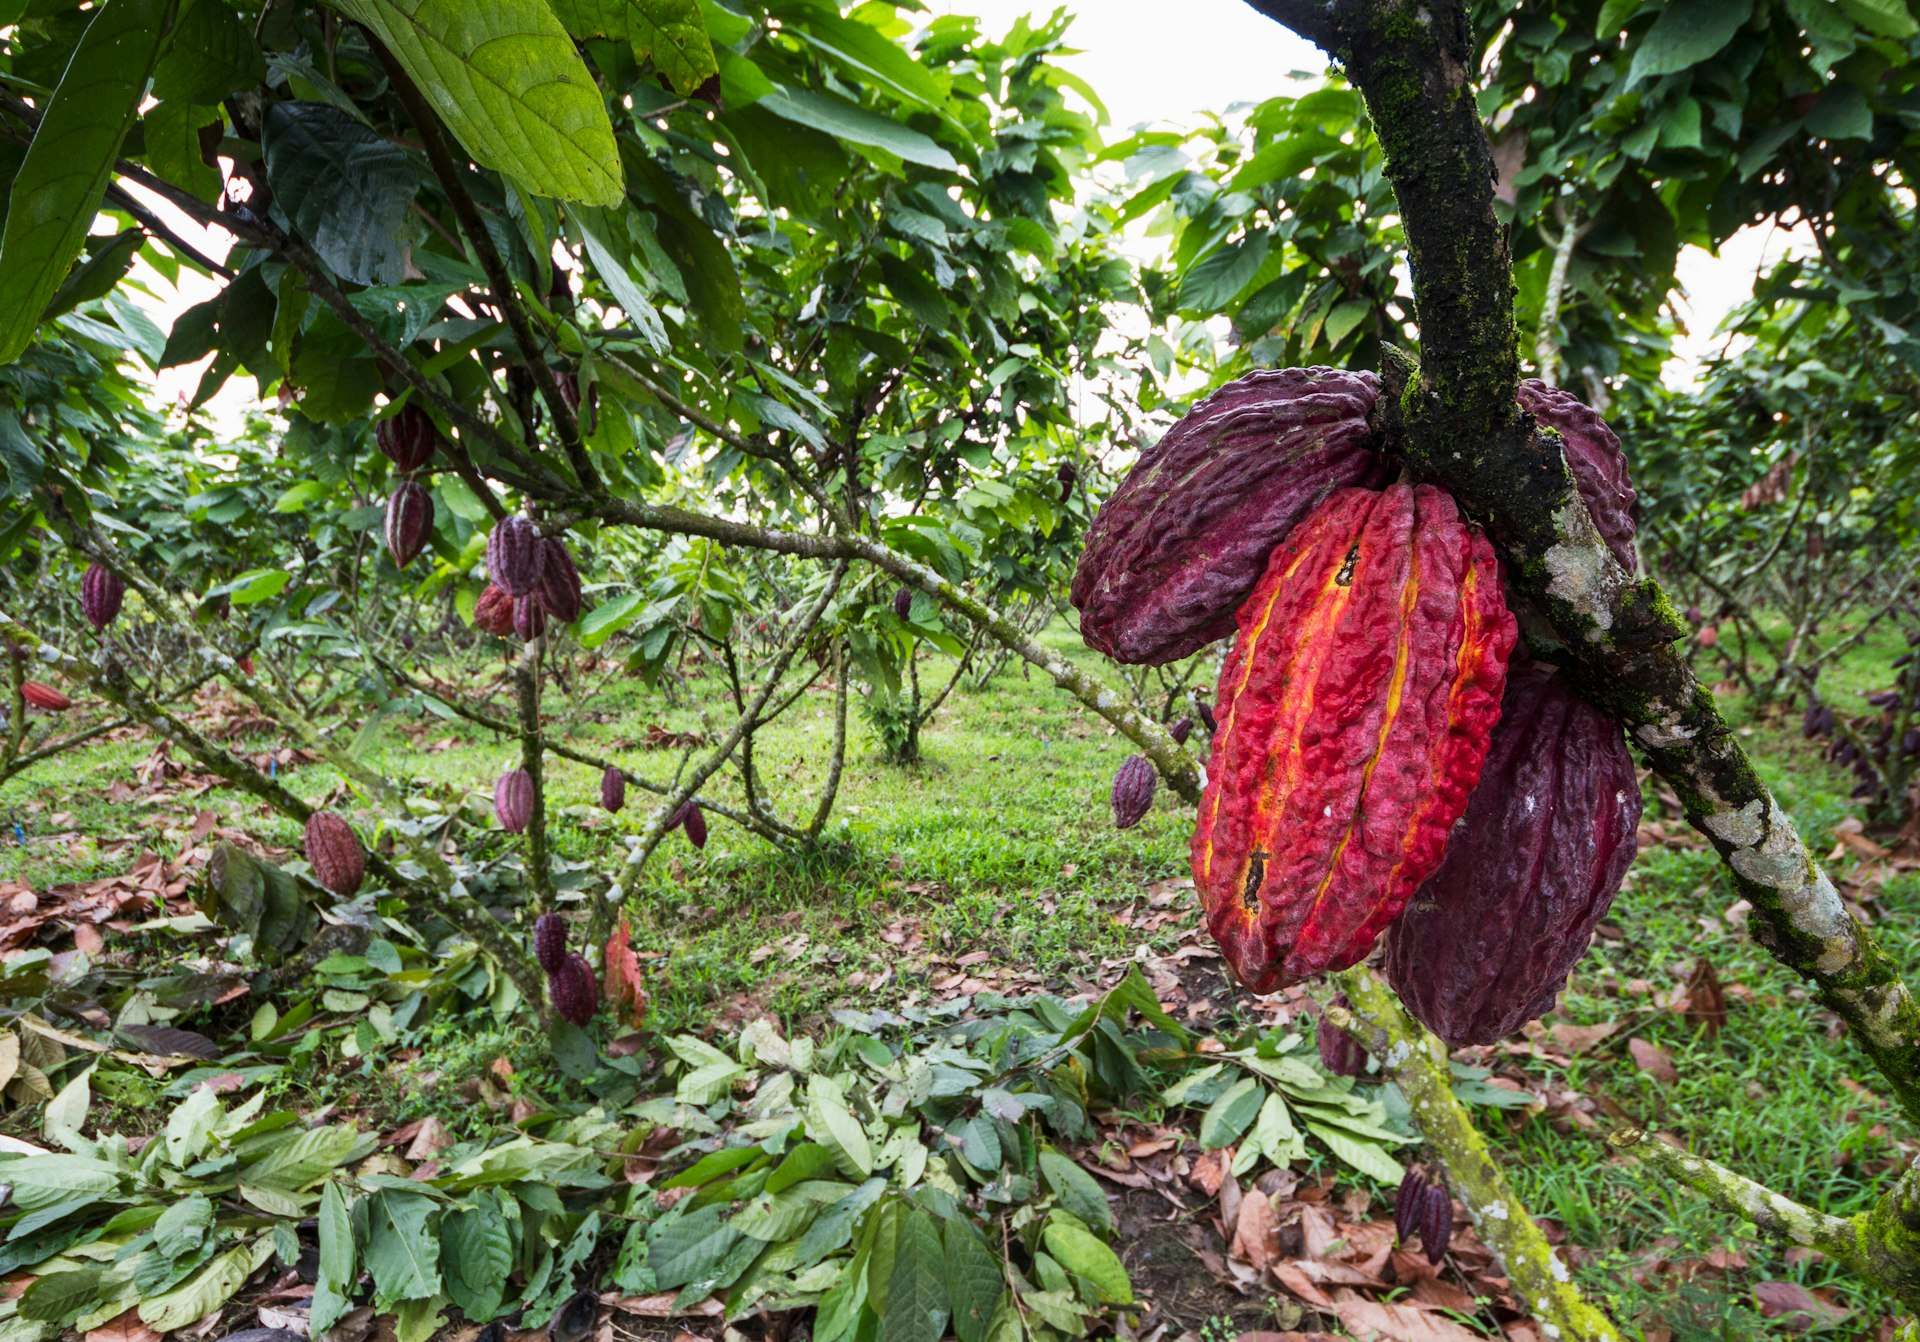 Cocoa pods growing in Guayas, Ecuador (Image by Insights / UIG / Getty Images)